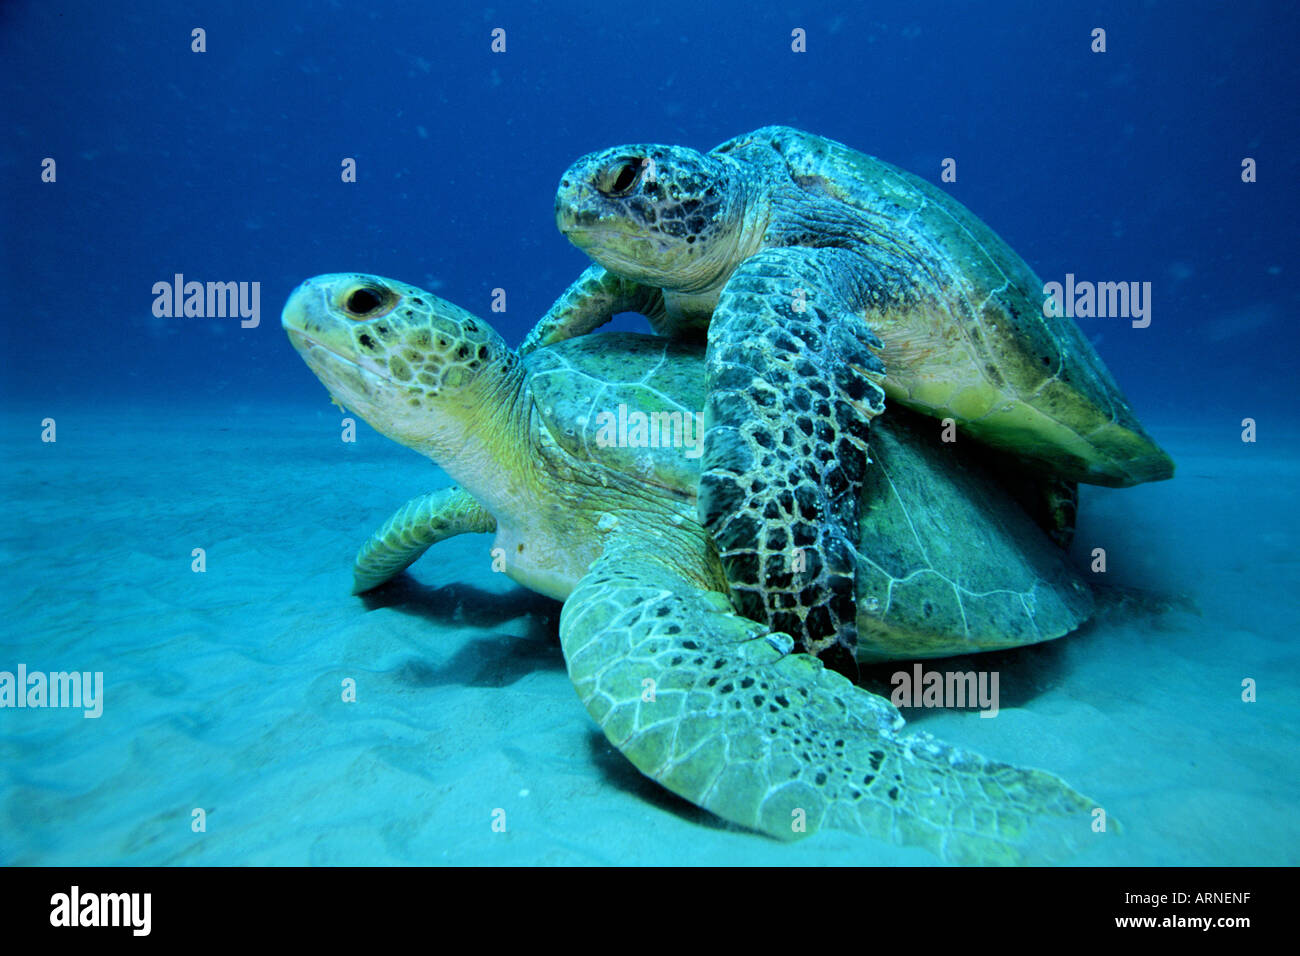 Green turtle Chelonia mydas is found in oceans worldwide They are endangered and while mating the male grasps the female with the claw on his front flippers Florida Atlantic Ocean Stock Photo